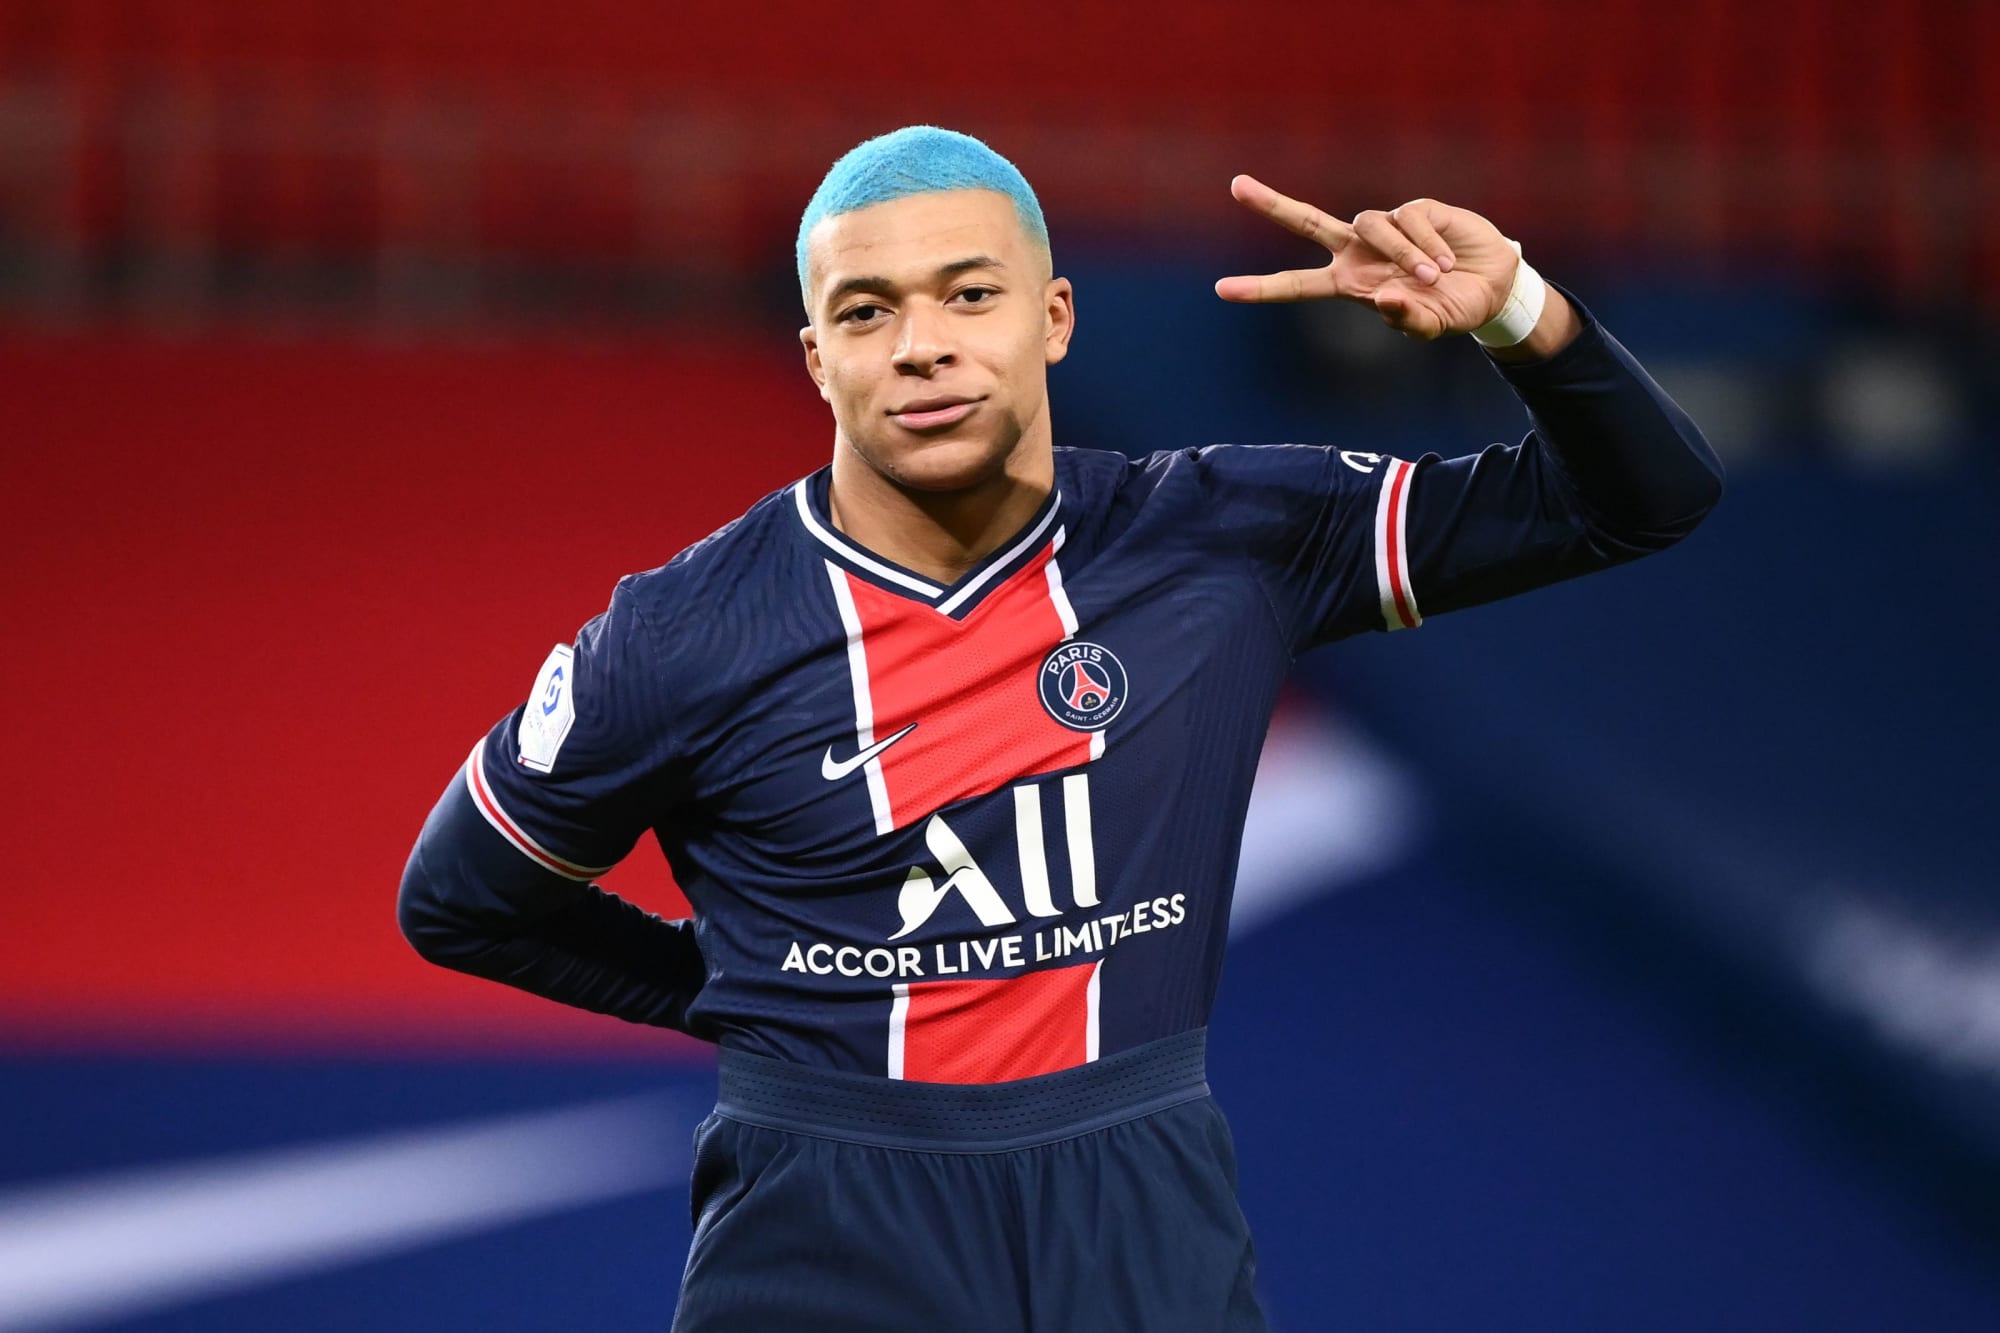 Real Madrid receive a boost in their attempt to sign Kylian Mbappe